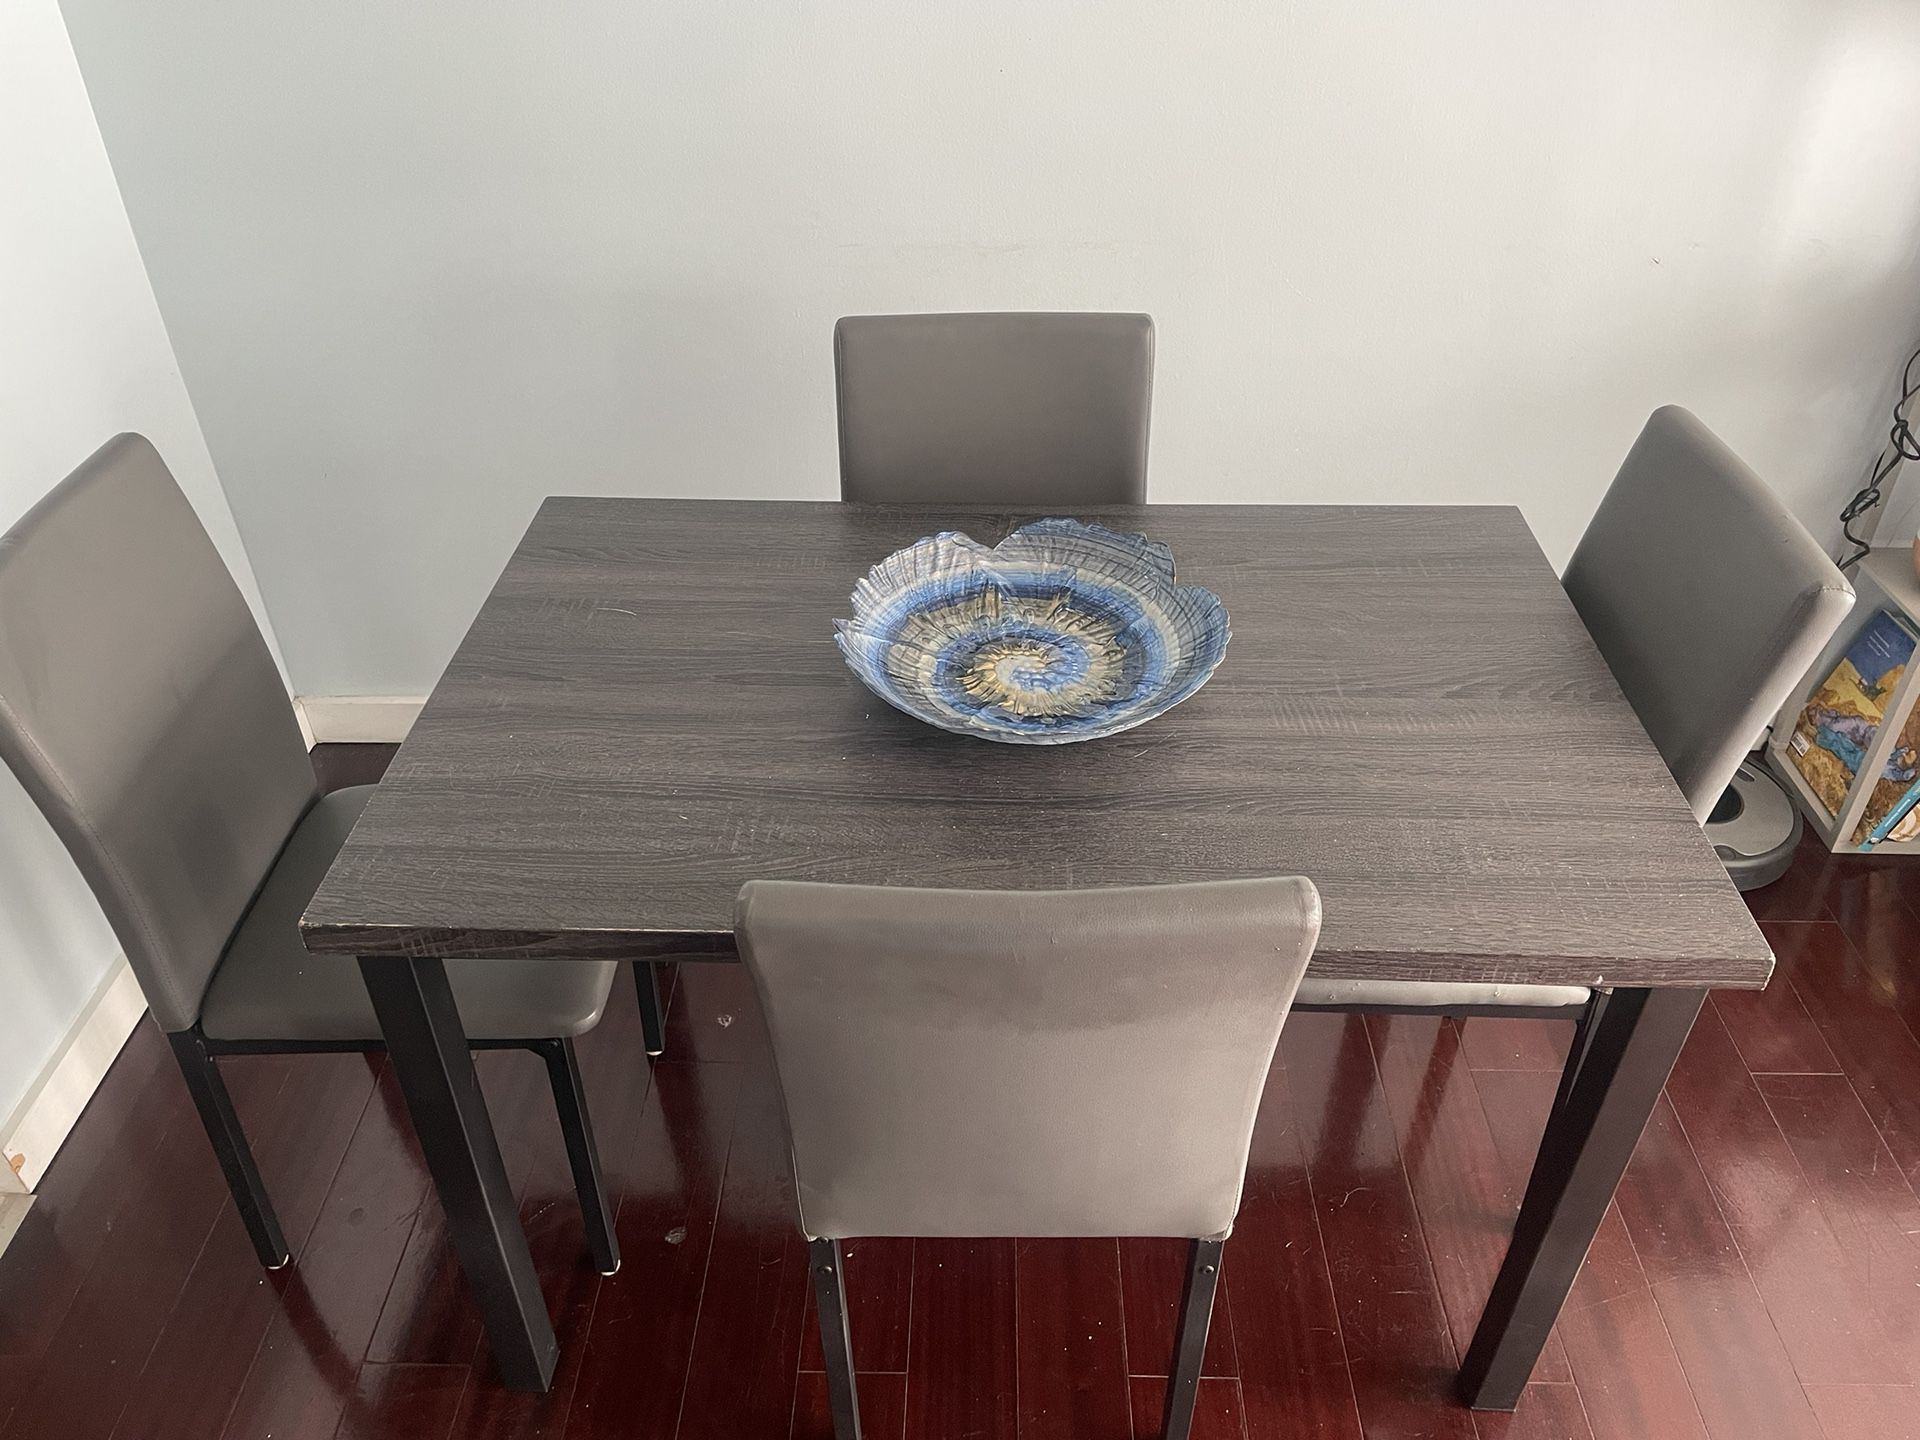 5 Piece Dining Room Table And Chairs 